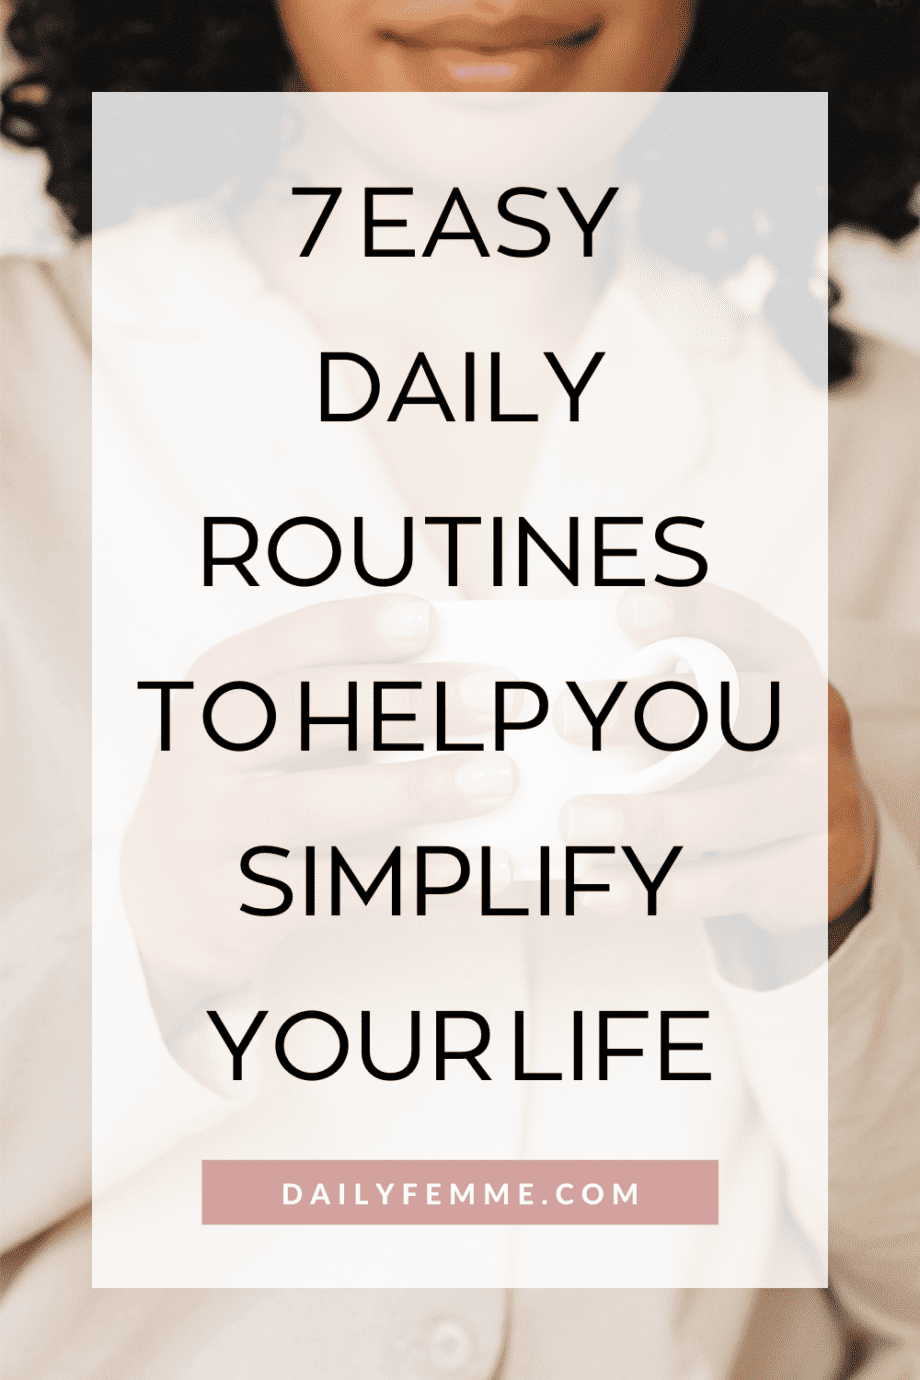 Daily routines are a brilliant way to help simplify your life, reduce overwhelm, and help you feel like you're in control of your day.